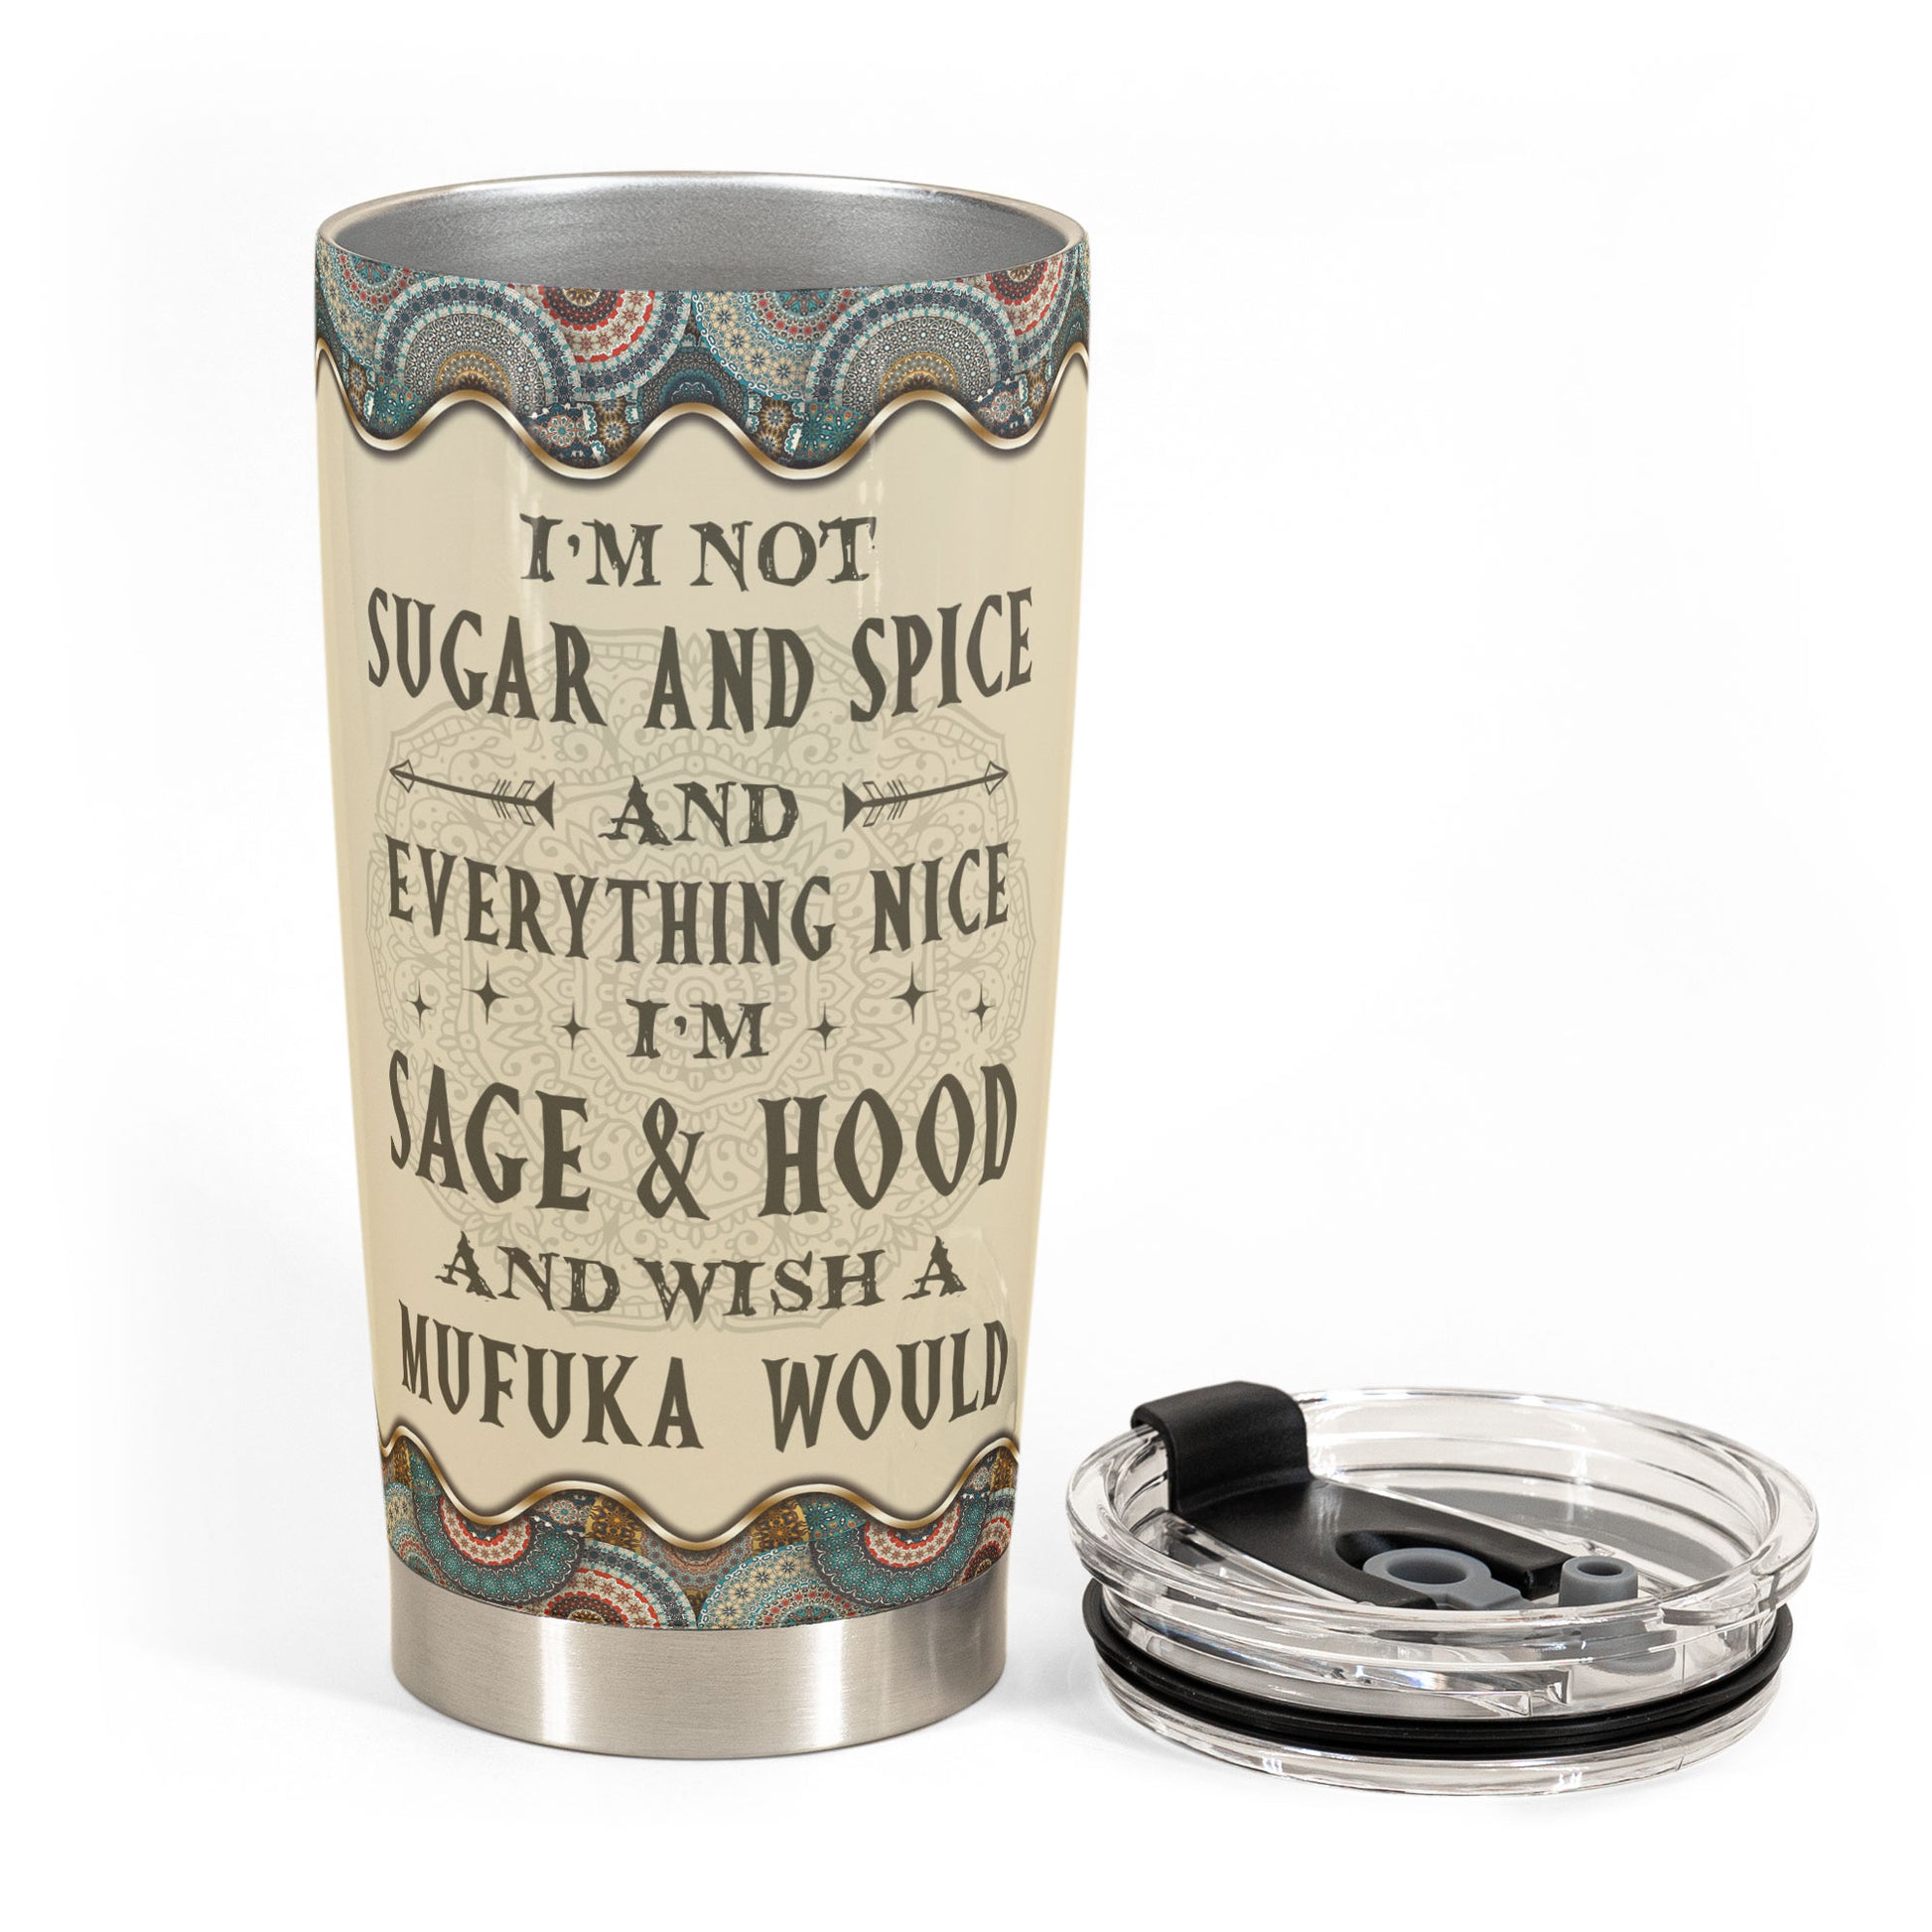 I'm Sage & Hood Wish A Mufuka Would - Personalized Tumbler Cup - Birthday, Loving Gift For Yoga Lovers